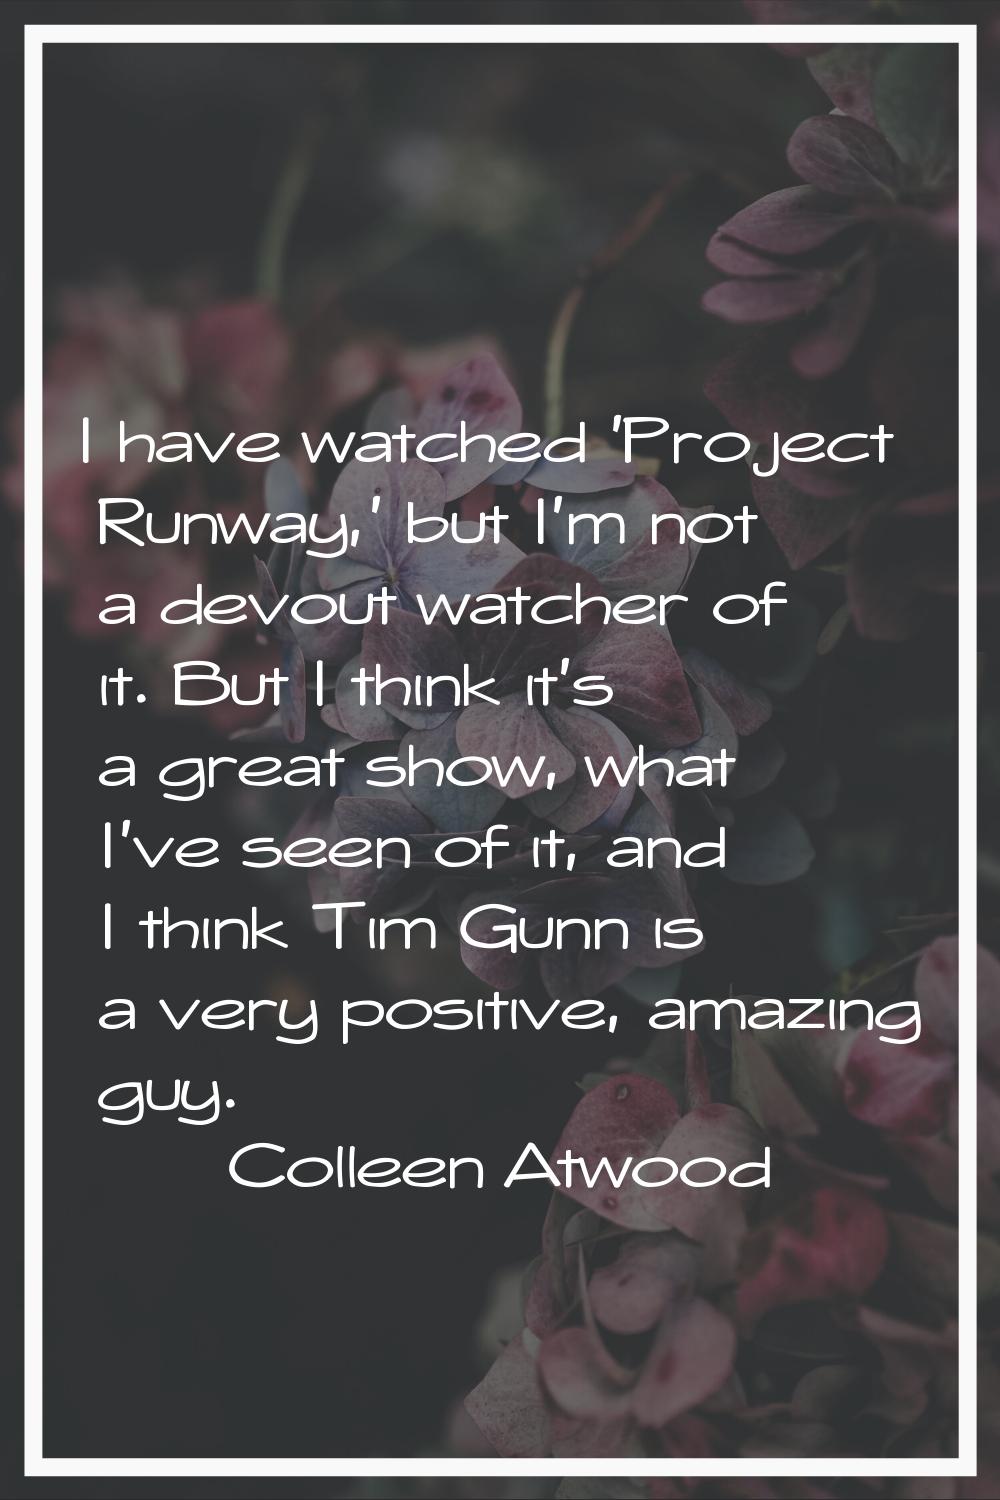 I have watched 'Project Runway,' but I'm not a devout watcher of it. But I think it's a great show,